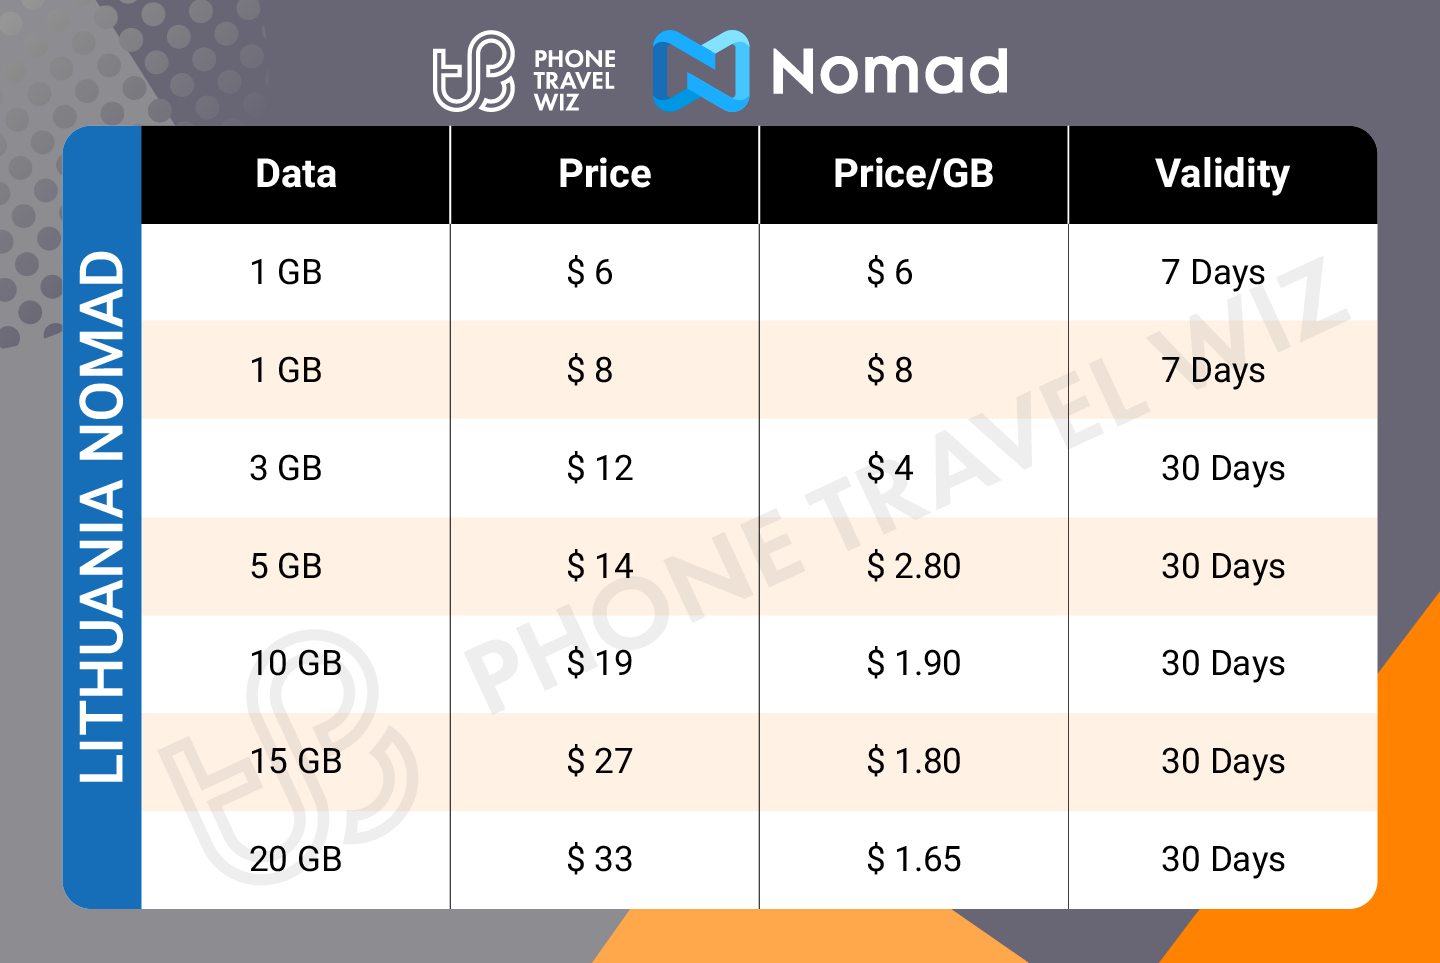 Nomad Lithuania eSIM Price & Data Details Infographic by Phone Travel Wiz